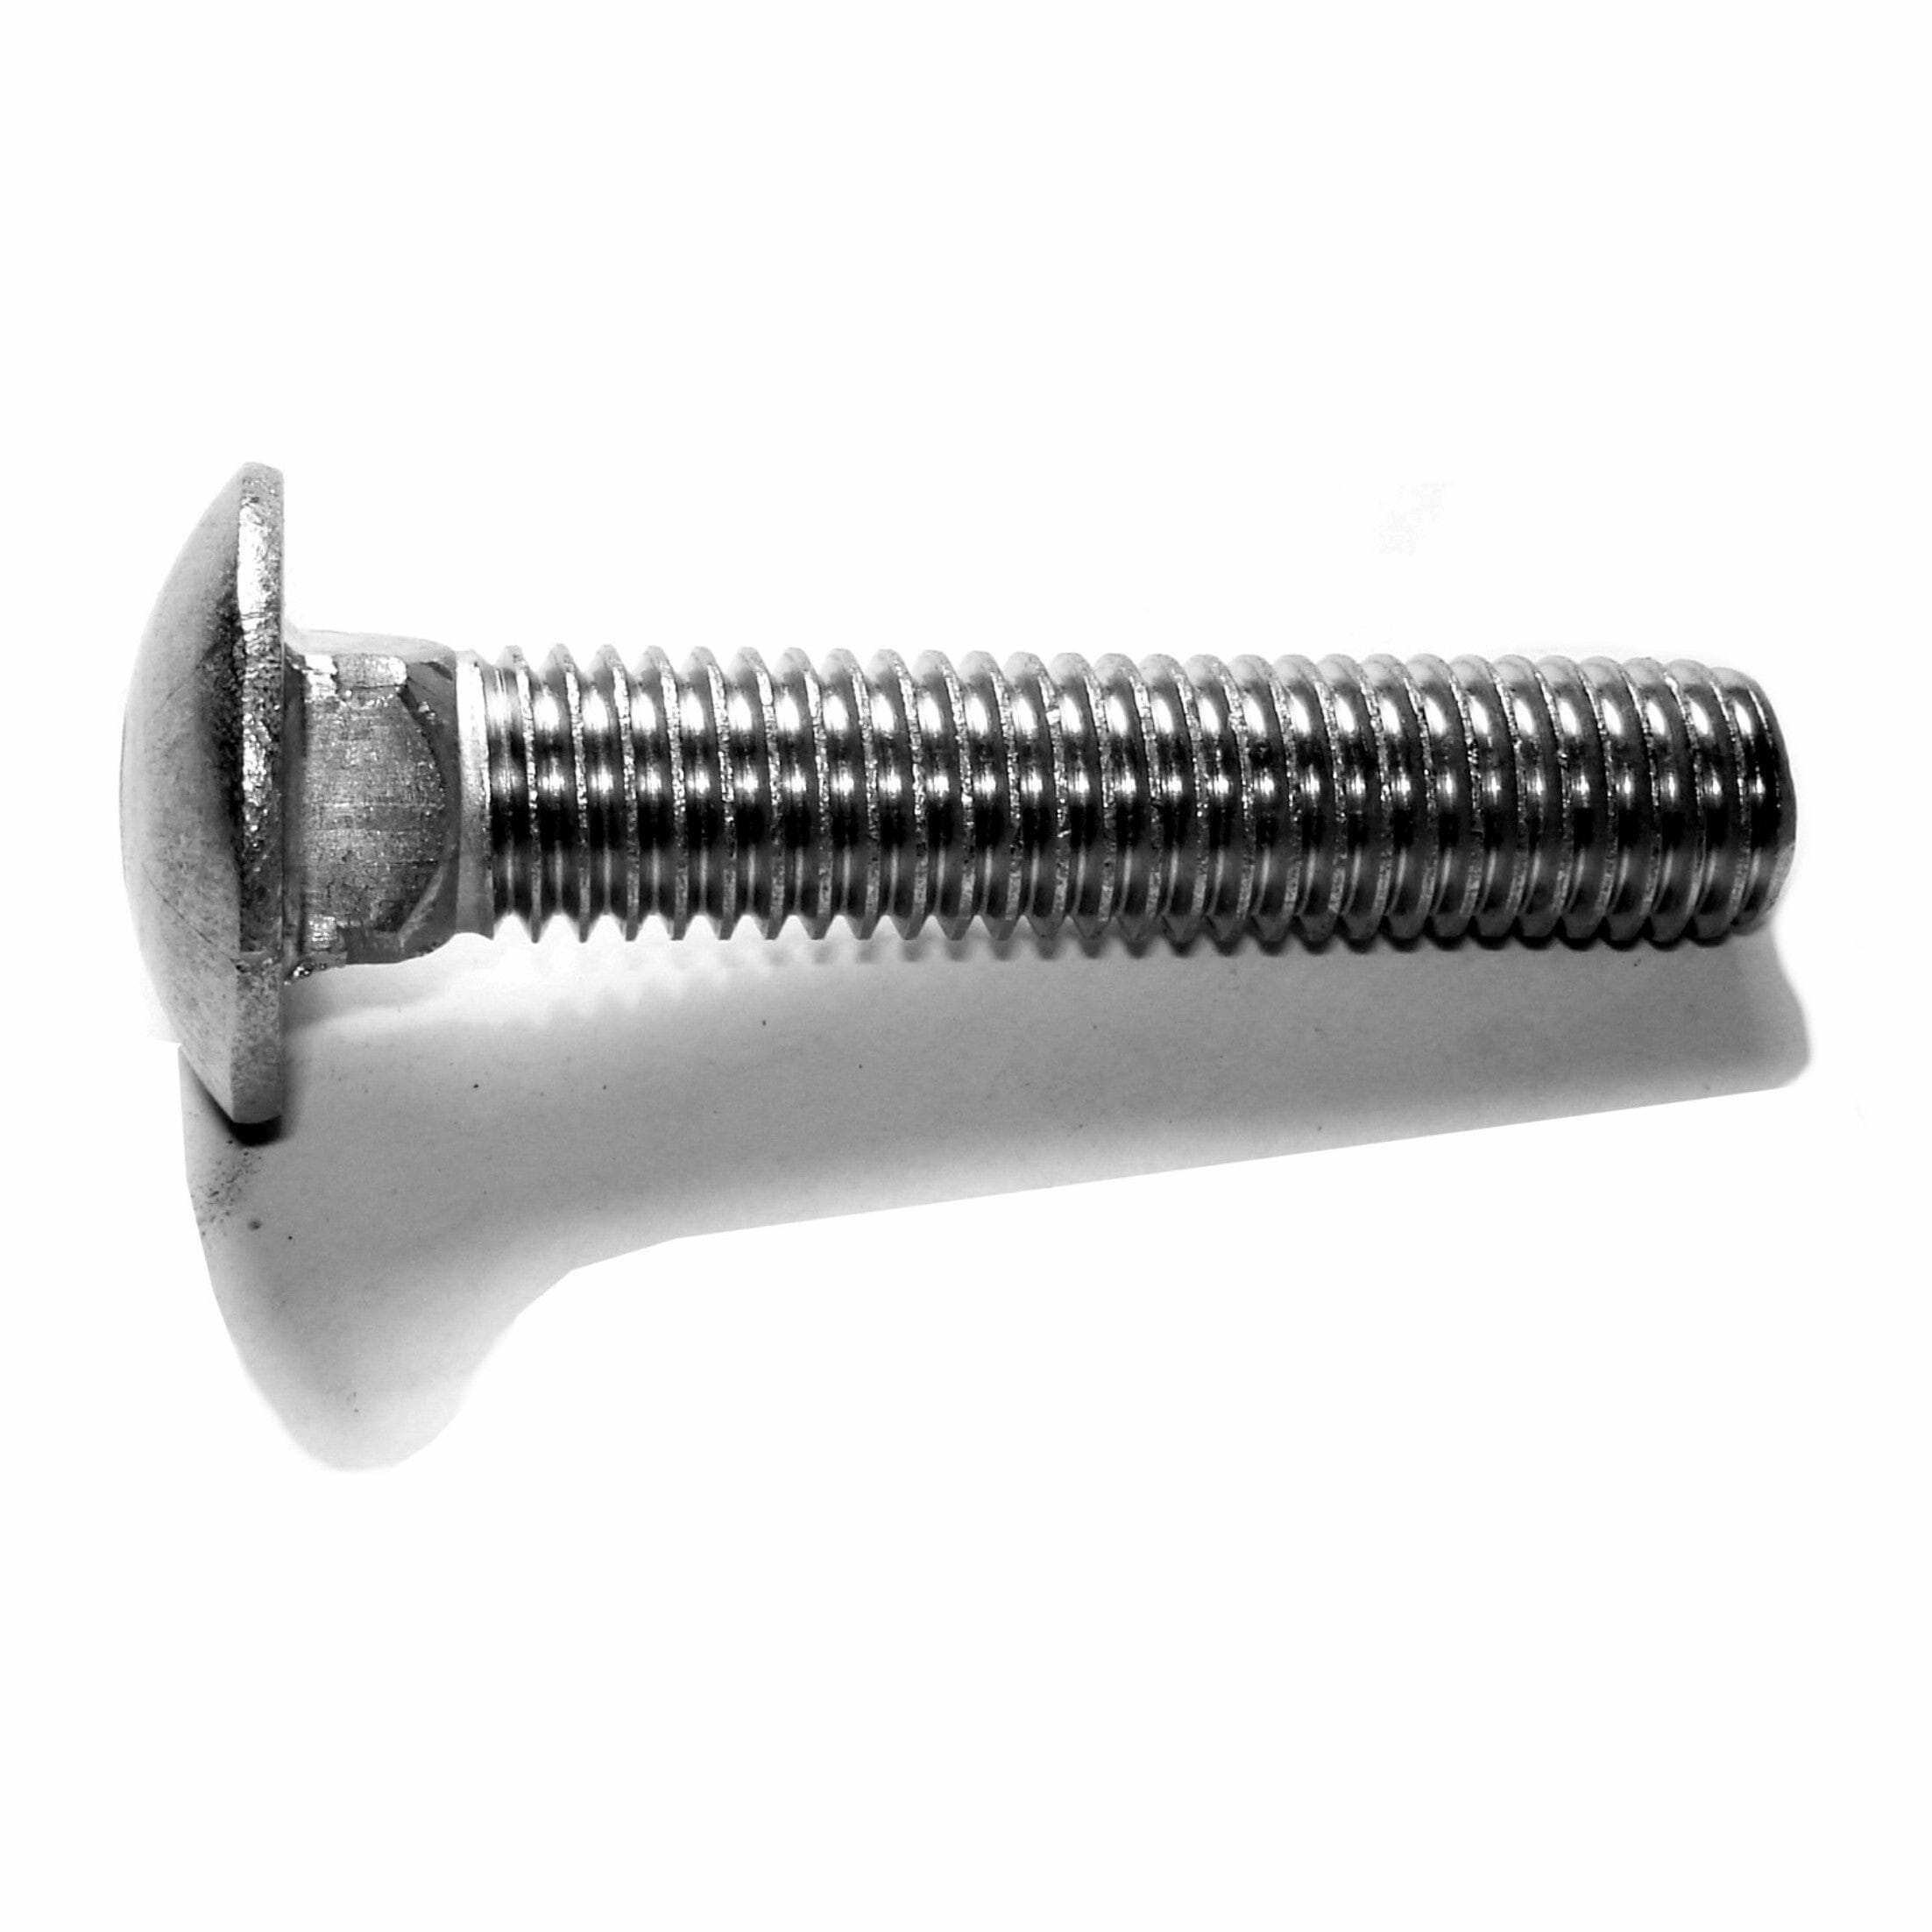 Fasteners, Bolts,1/2″-13 x 2-1/2″, Carriage Bolts